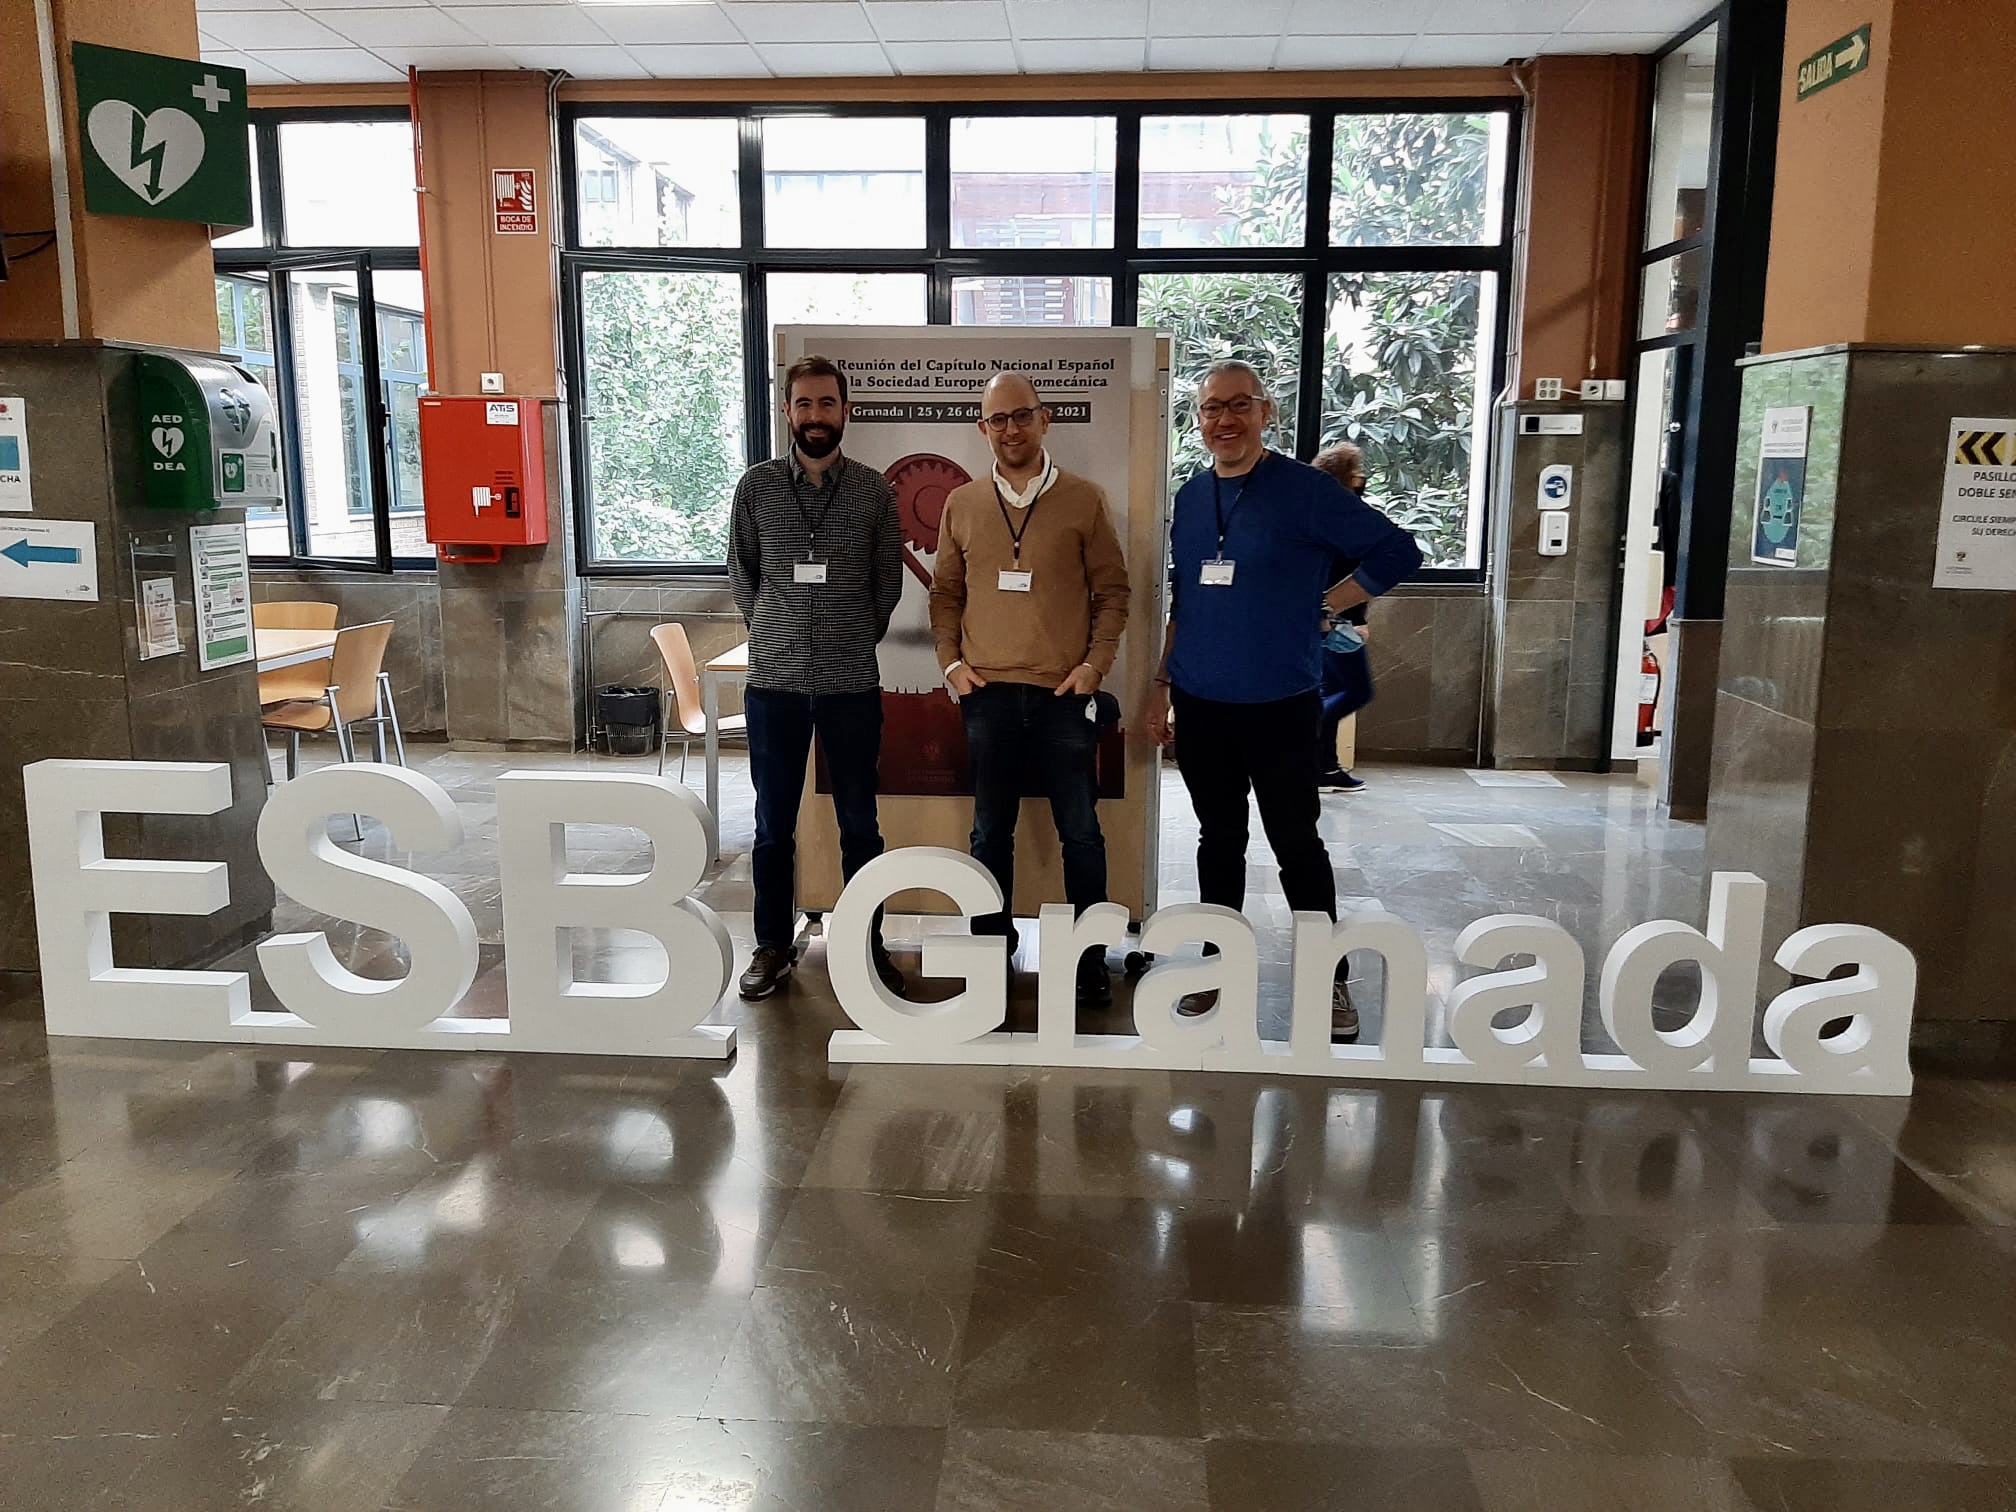 The BIOMEC Lab participated in the X Meeting of the Spanish Chapter of the European Society of Biomechanics